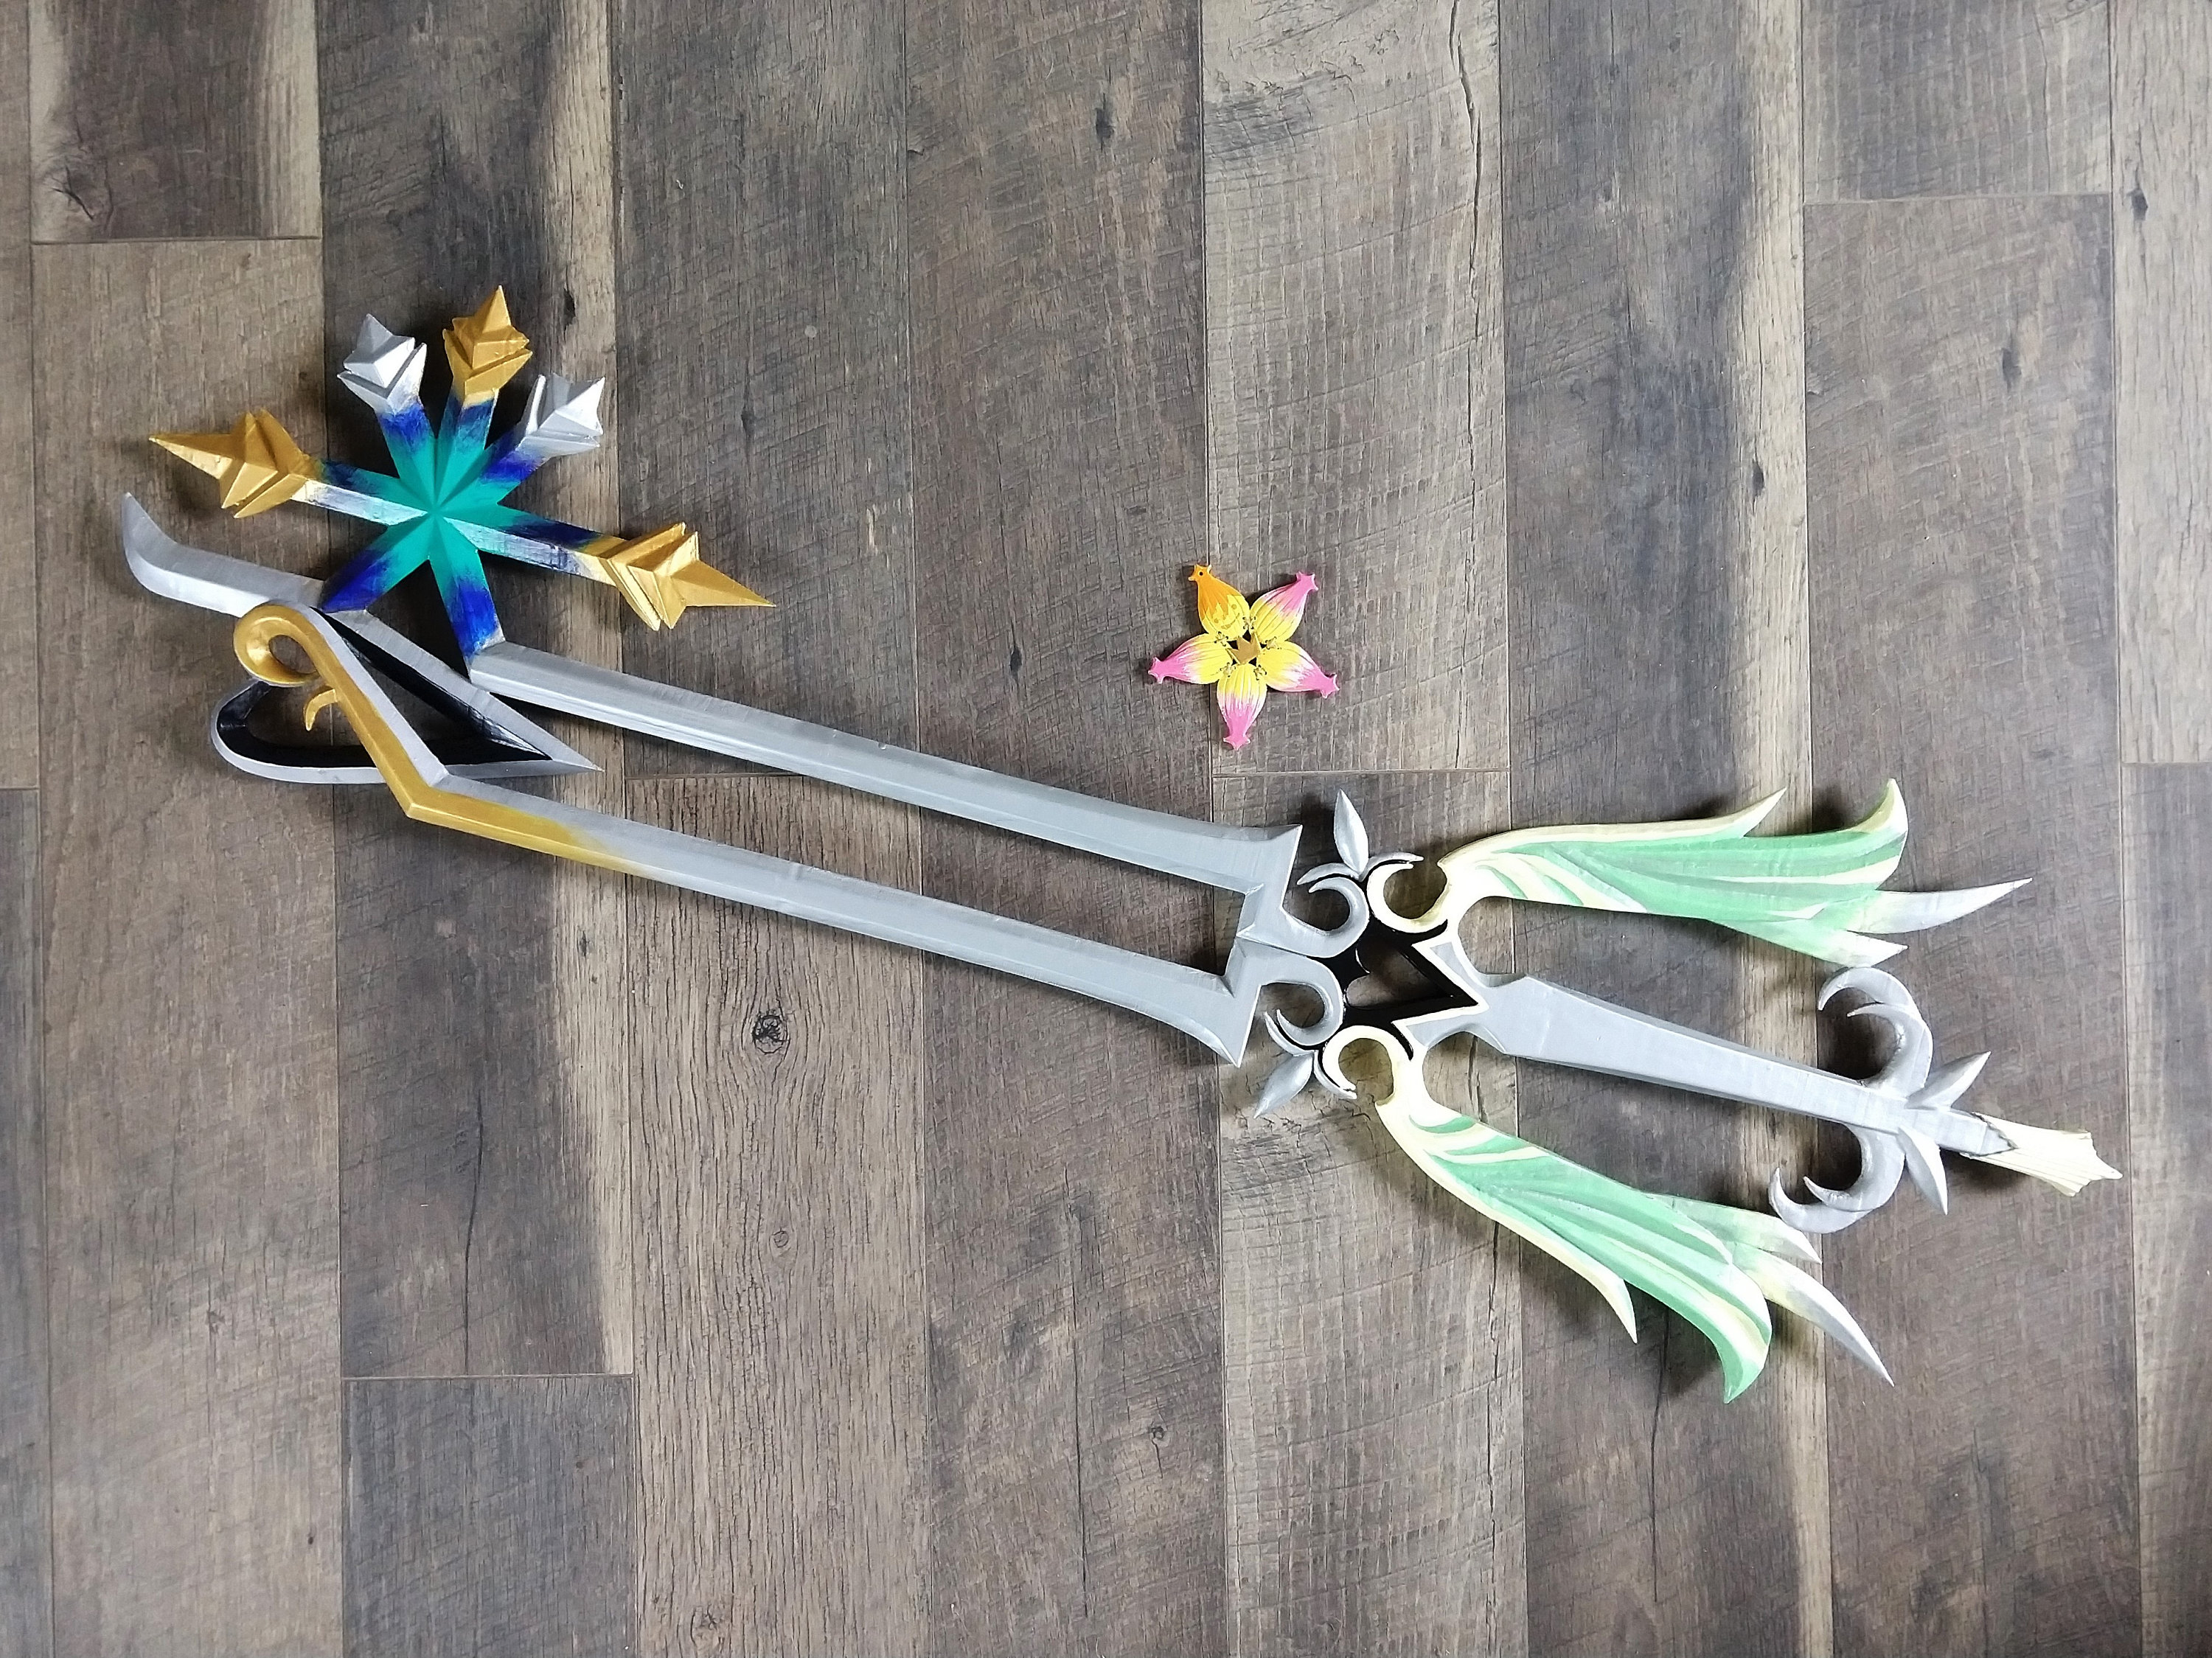 Kingdom Hearts Sora Cosplay Costume. Keyblade Sword. Cosplay Foam Armor  Prop. Kingdom Blade Keyblade. Video Game Party Cosplay Costume. 